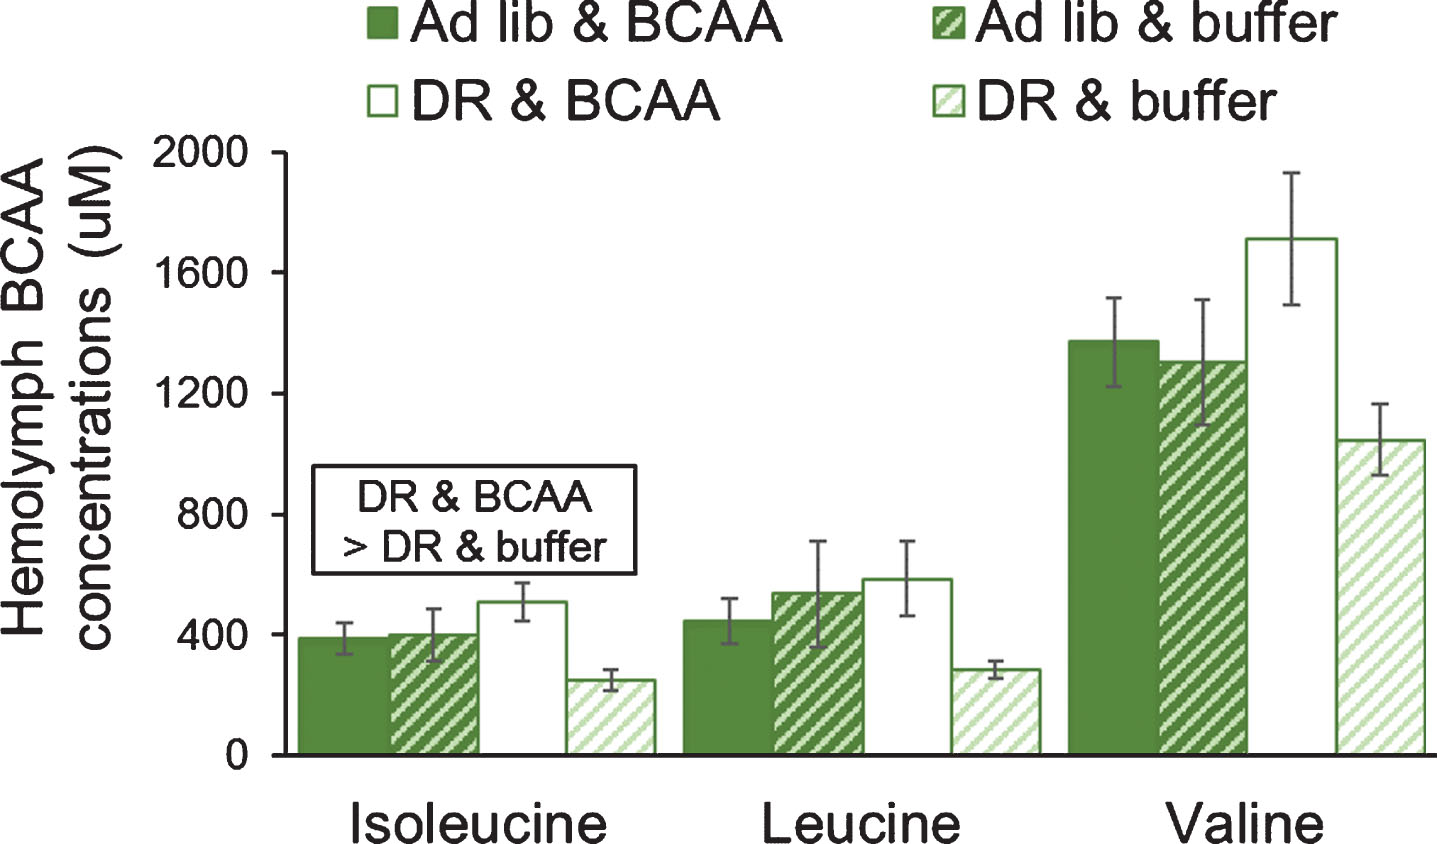 Force-feeding of BCAAs tended to increase BCAAs in hemolymph of female grasshoppers fed on dietary restriction lettuce (60% of ad libitum). Grasshoppers were force-fed BCAAs daily: approximately 0.90 mg isoleucine, 1.52 mg leucine, and 1.10 mg valine. The amount of BCAAs fed was adjusted weekly so that the total consumption of BCAAs was the same in the ad libitum lettuce & buffer and DR lettuce & BCAA groups. Data were tested using a two-way MANOVA. Error bars show one Standard Error.